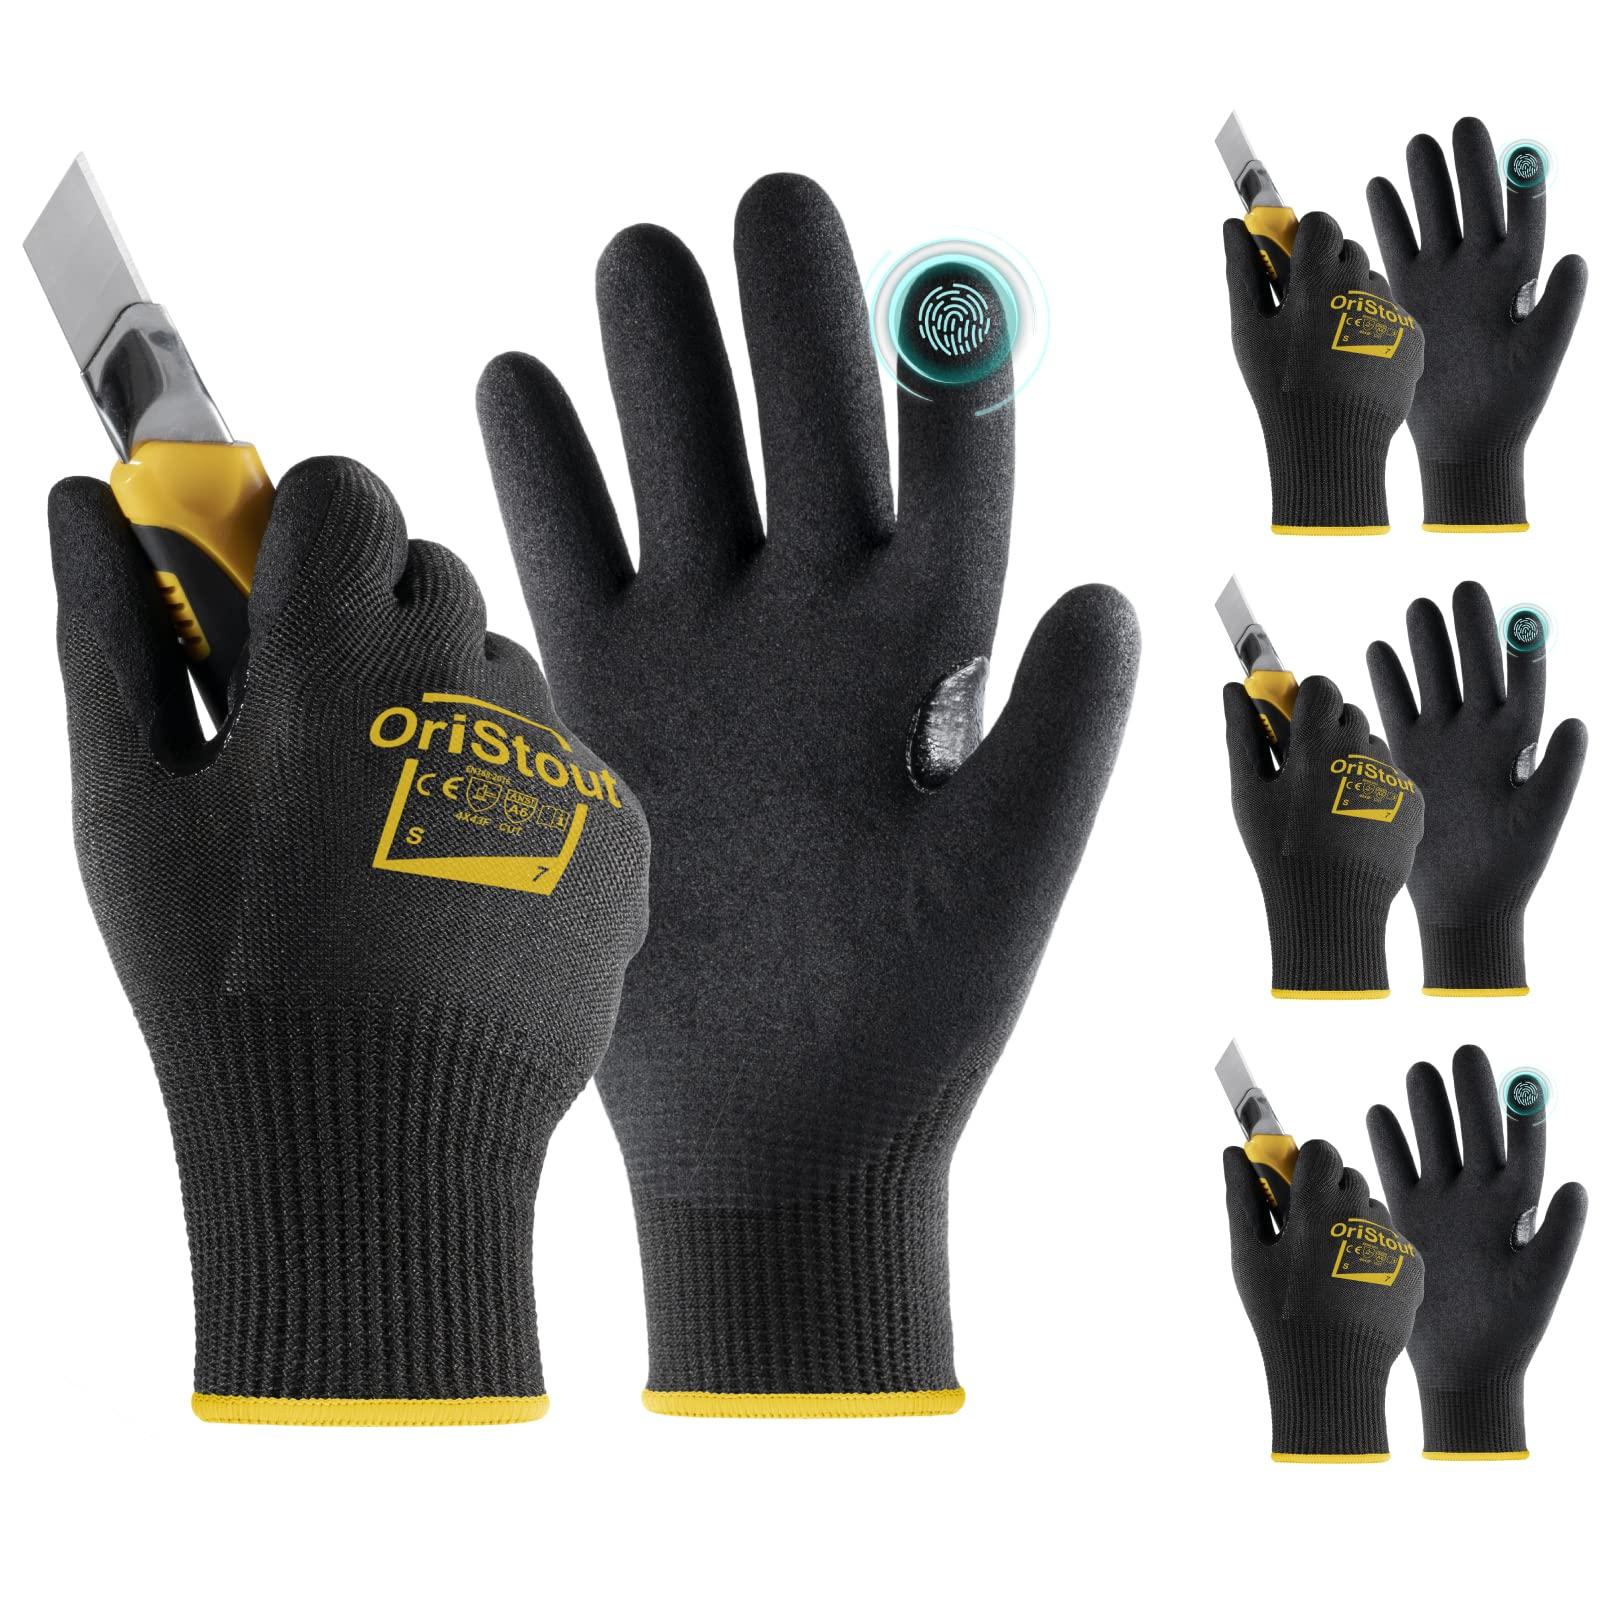 Cut Resistant Work Gloves, EN388 4X43F Level 6, Touchscreen, Sandy Nitrile Coated Firm Grip, Cut Proof Protective Gloves for Woodworking, Warehouse, Fishing, Kitchen, Gardening(3 Pairs, Small/7) 0